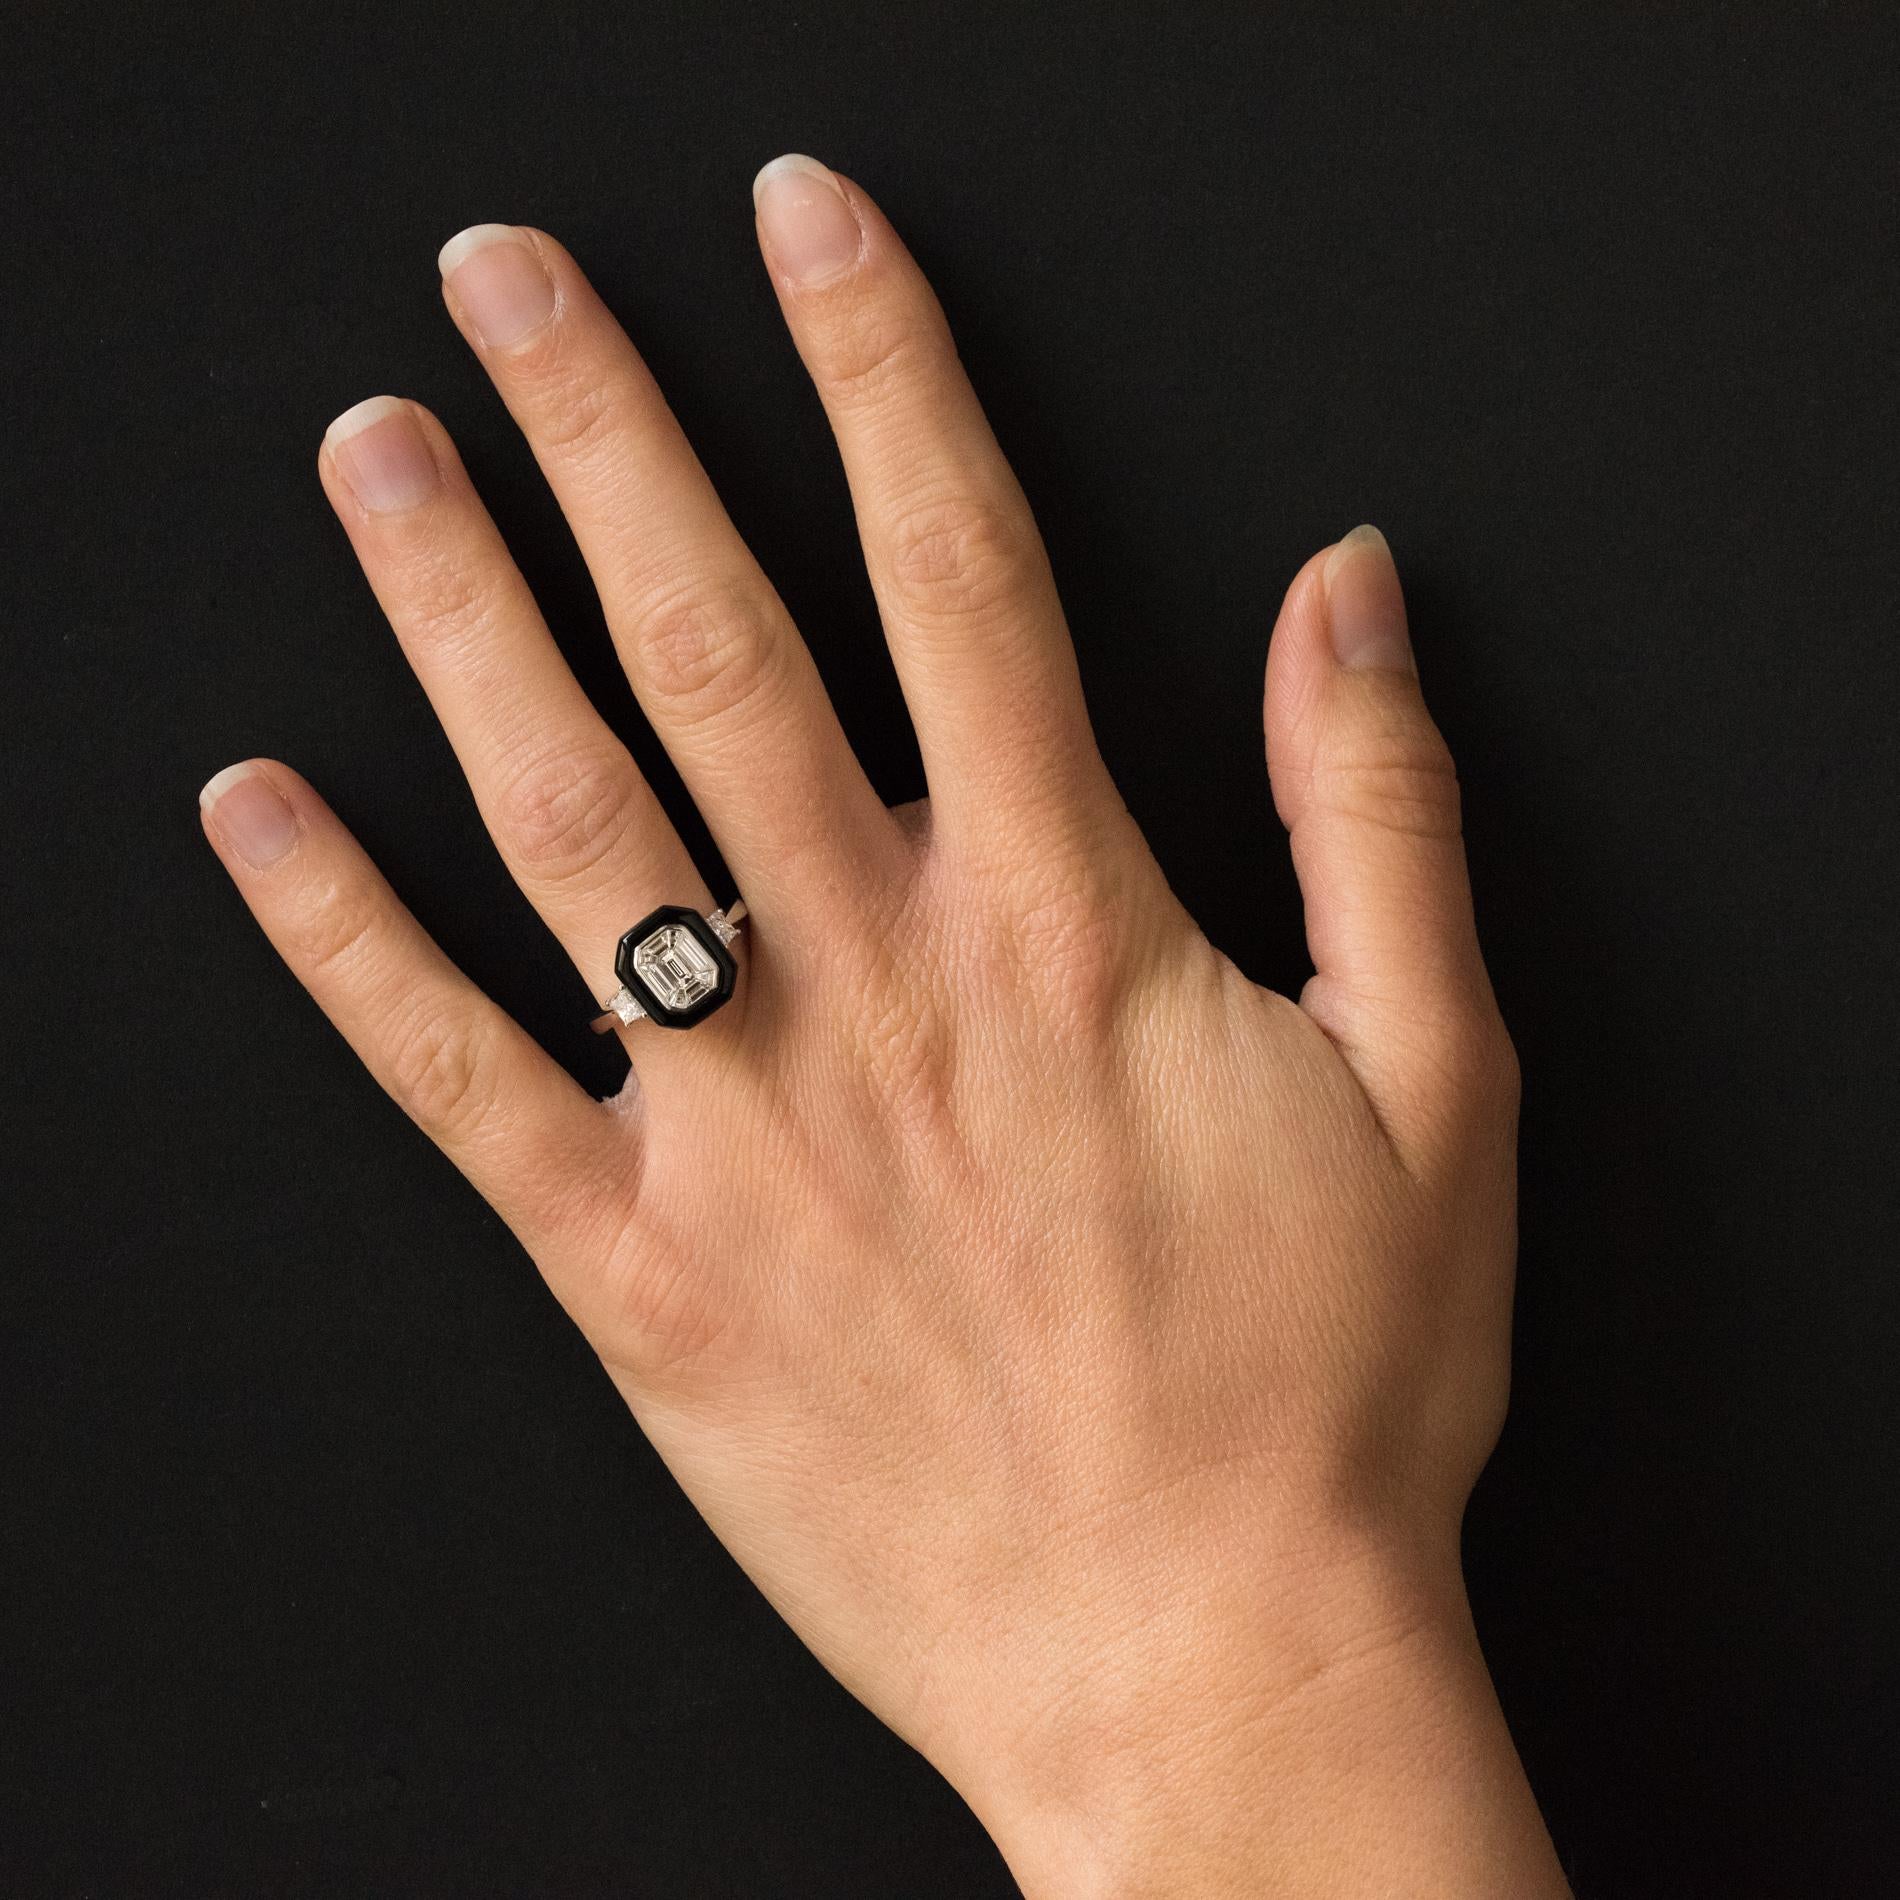 Ring in 18 ckarats white gold.
Splendid diamond ring art deco style, it is set on a hexagonal setting of baguette diamonds in a black agate entourage. On either side on the start of the ring are set bright modern- cut diamonds.
Total weight of